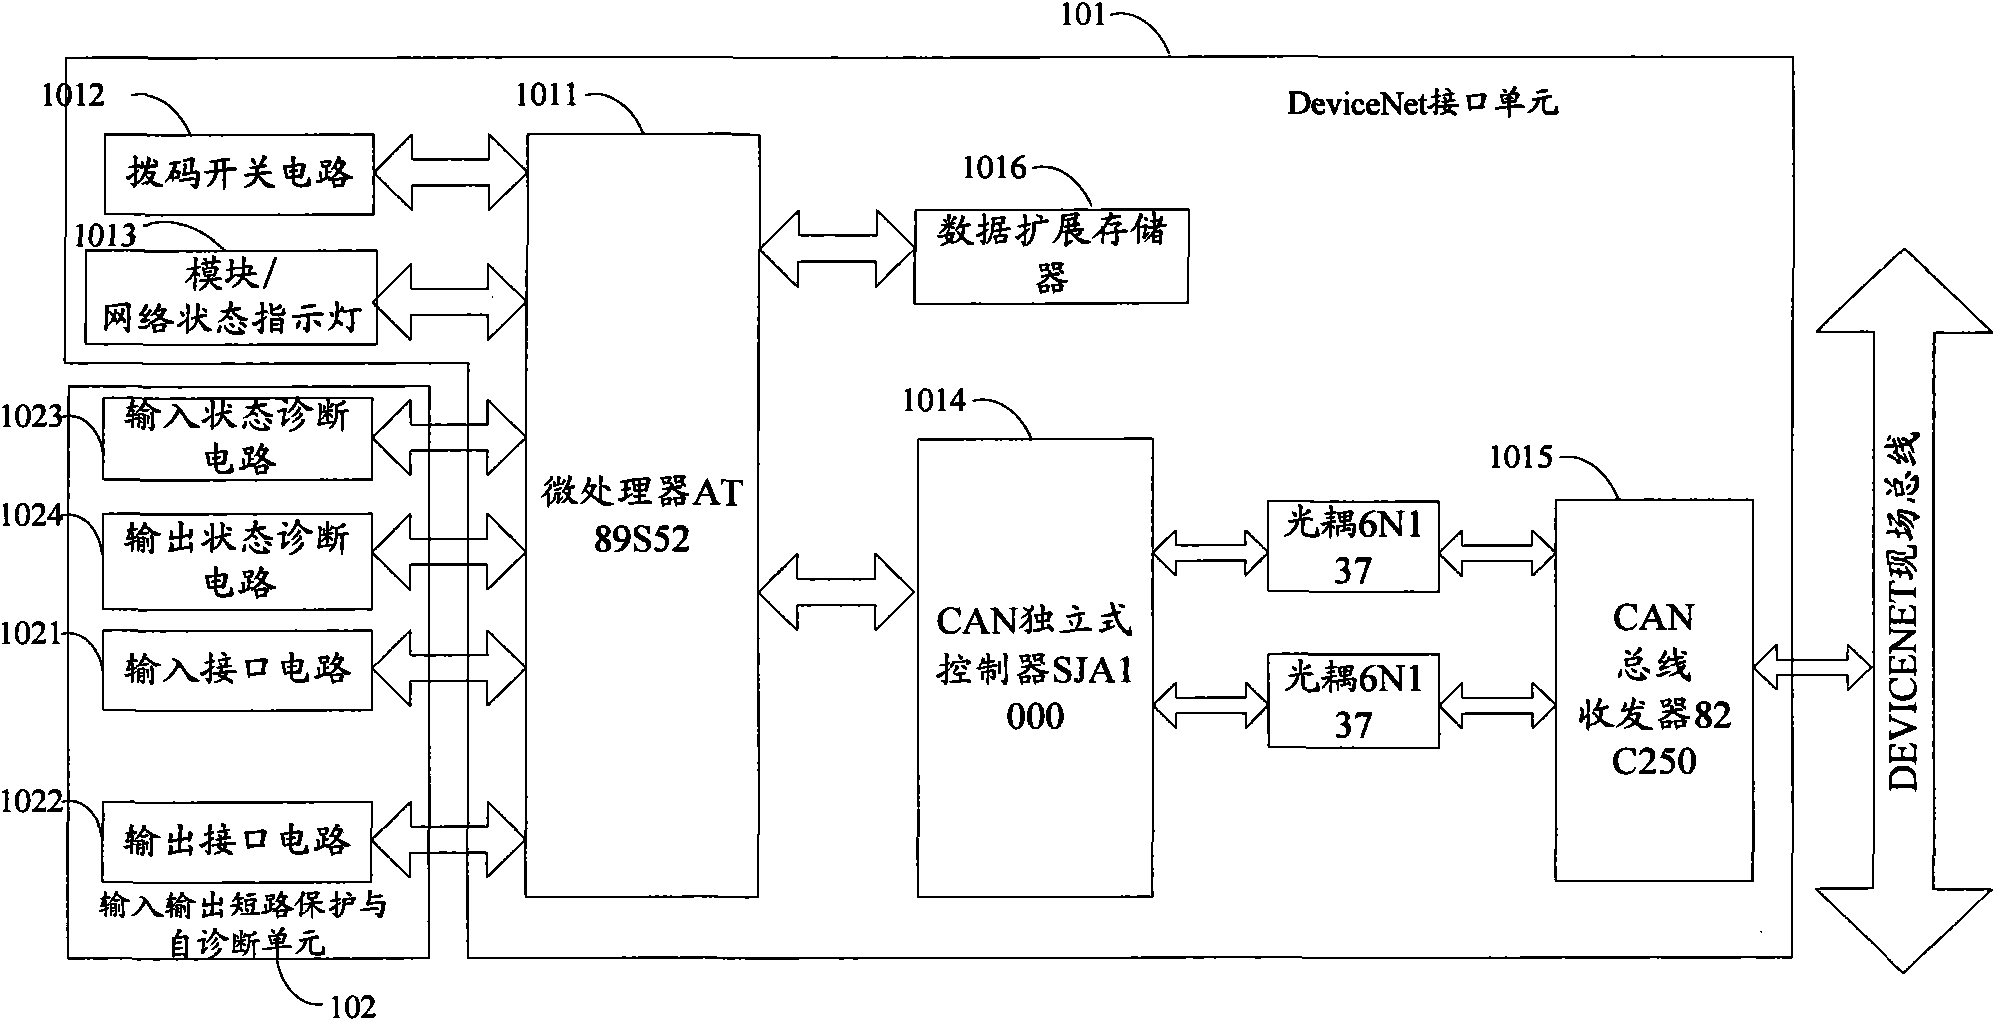 DeviceNet fieldbus input/output device with short-circuit protection and self-diagnostic function